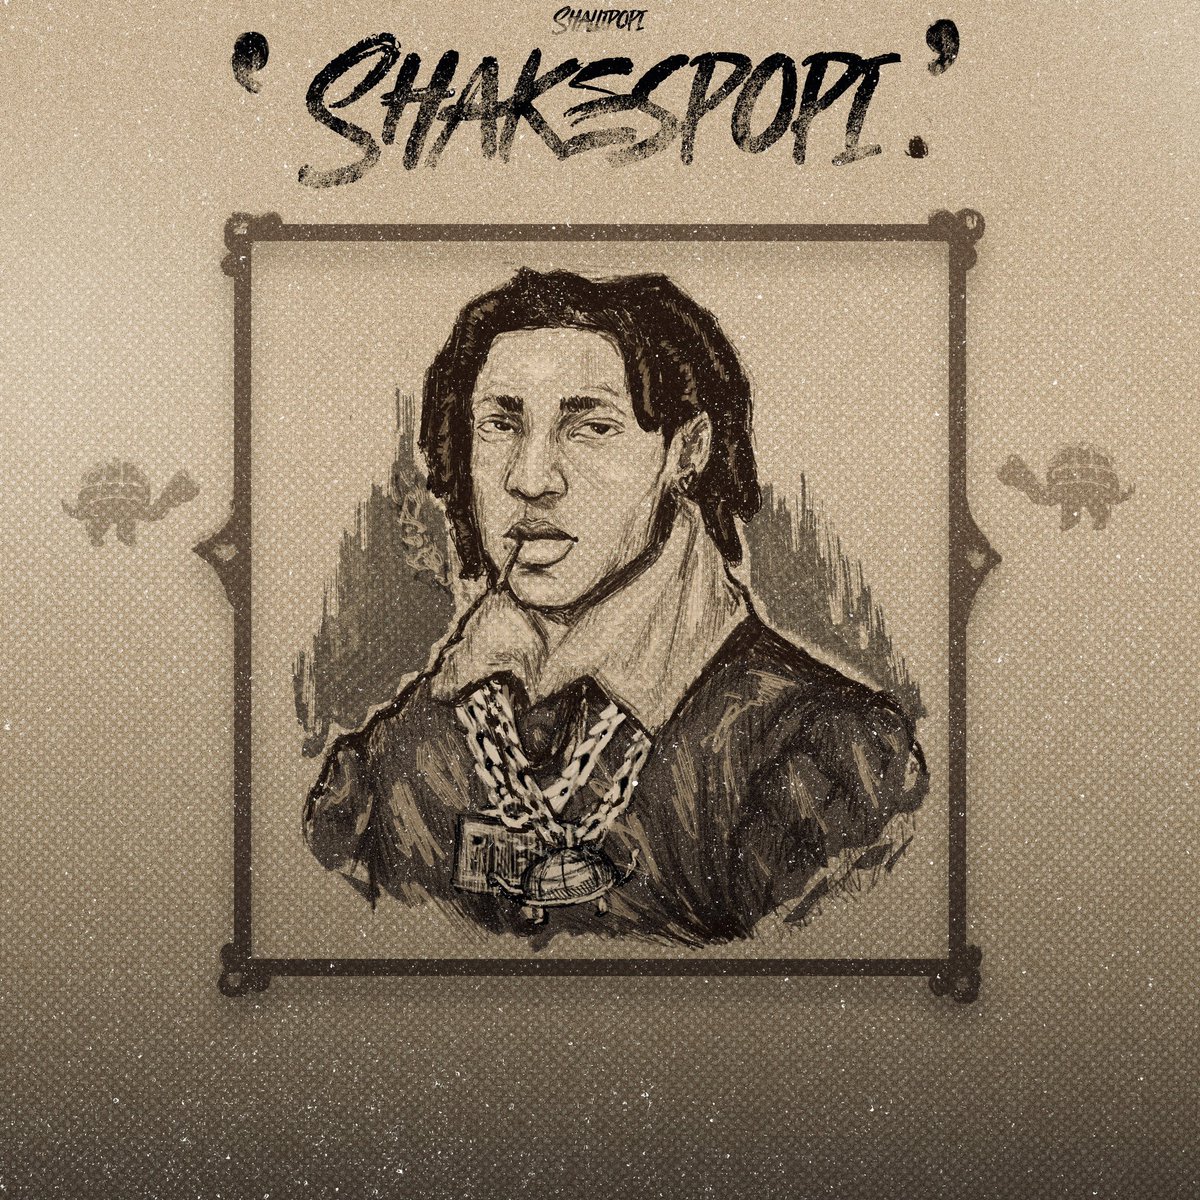 Enough time has passed, what is your honest opinion about shallipopi's Shakespopi album?